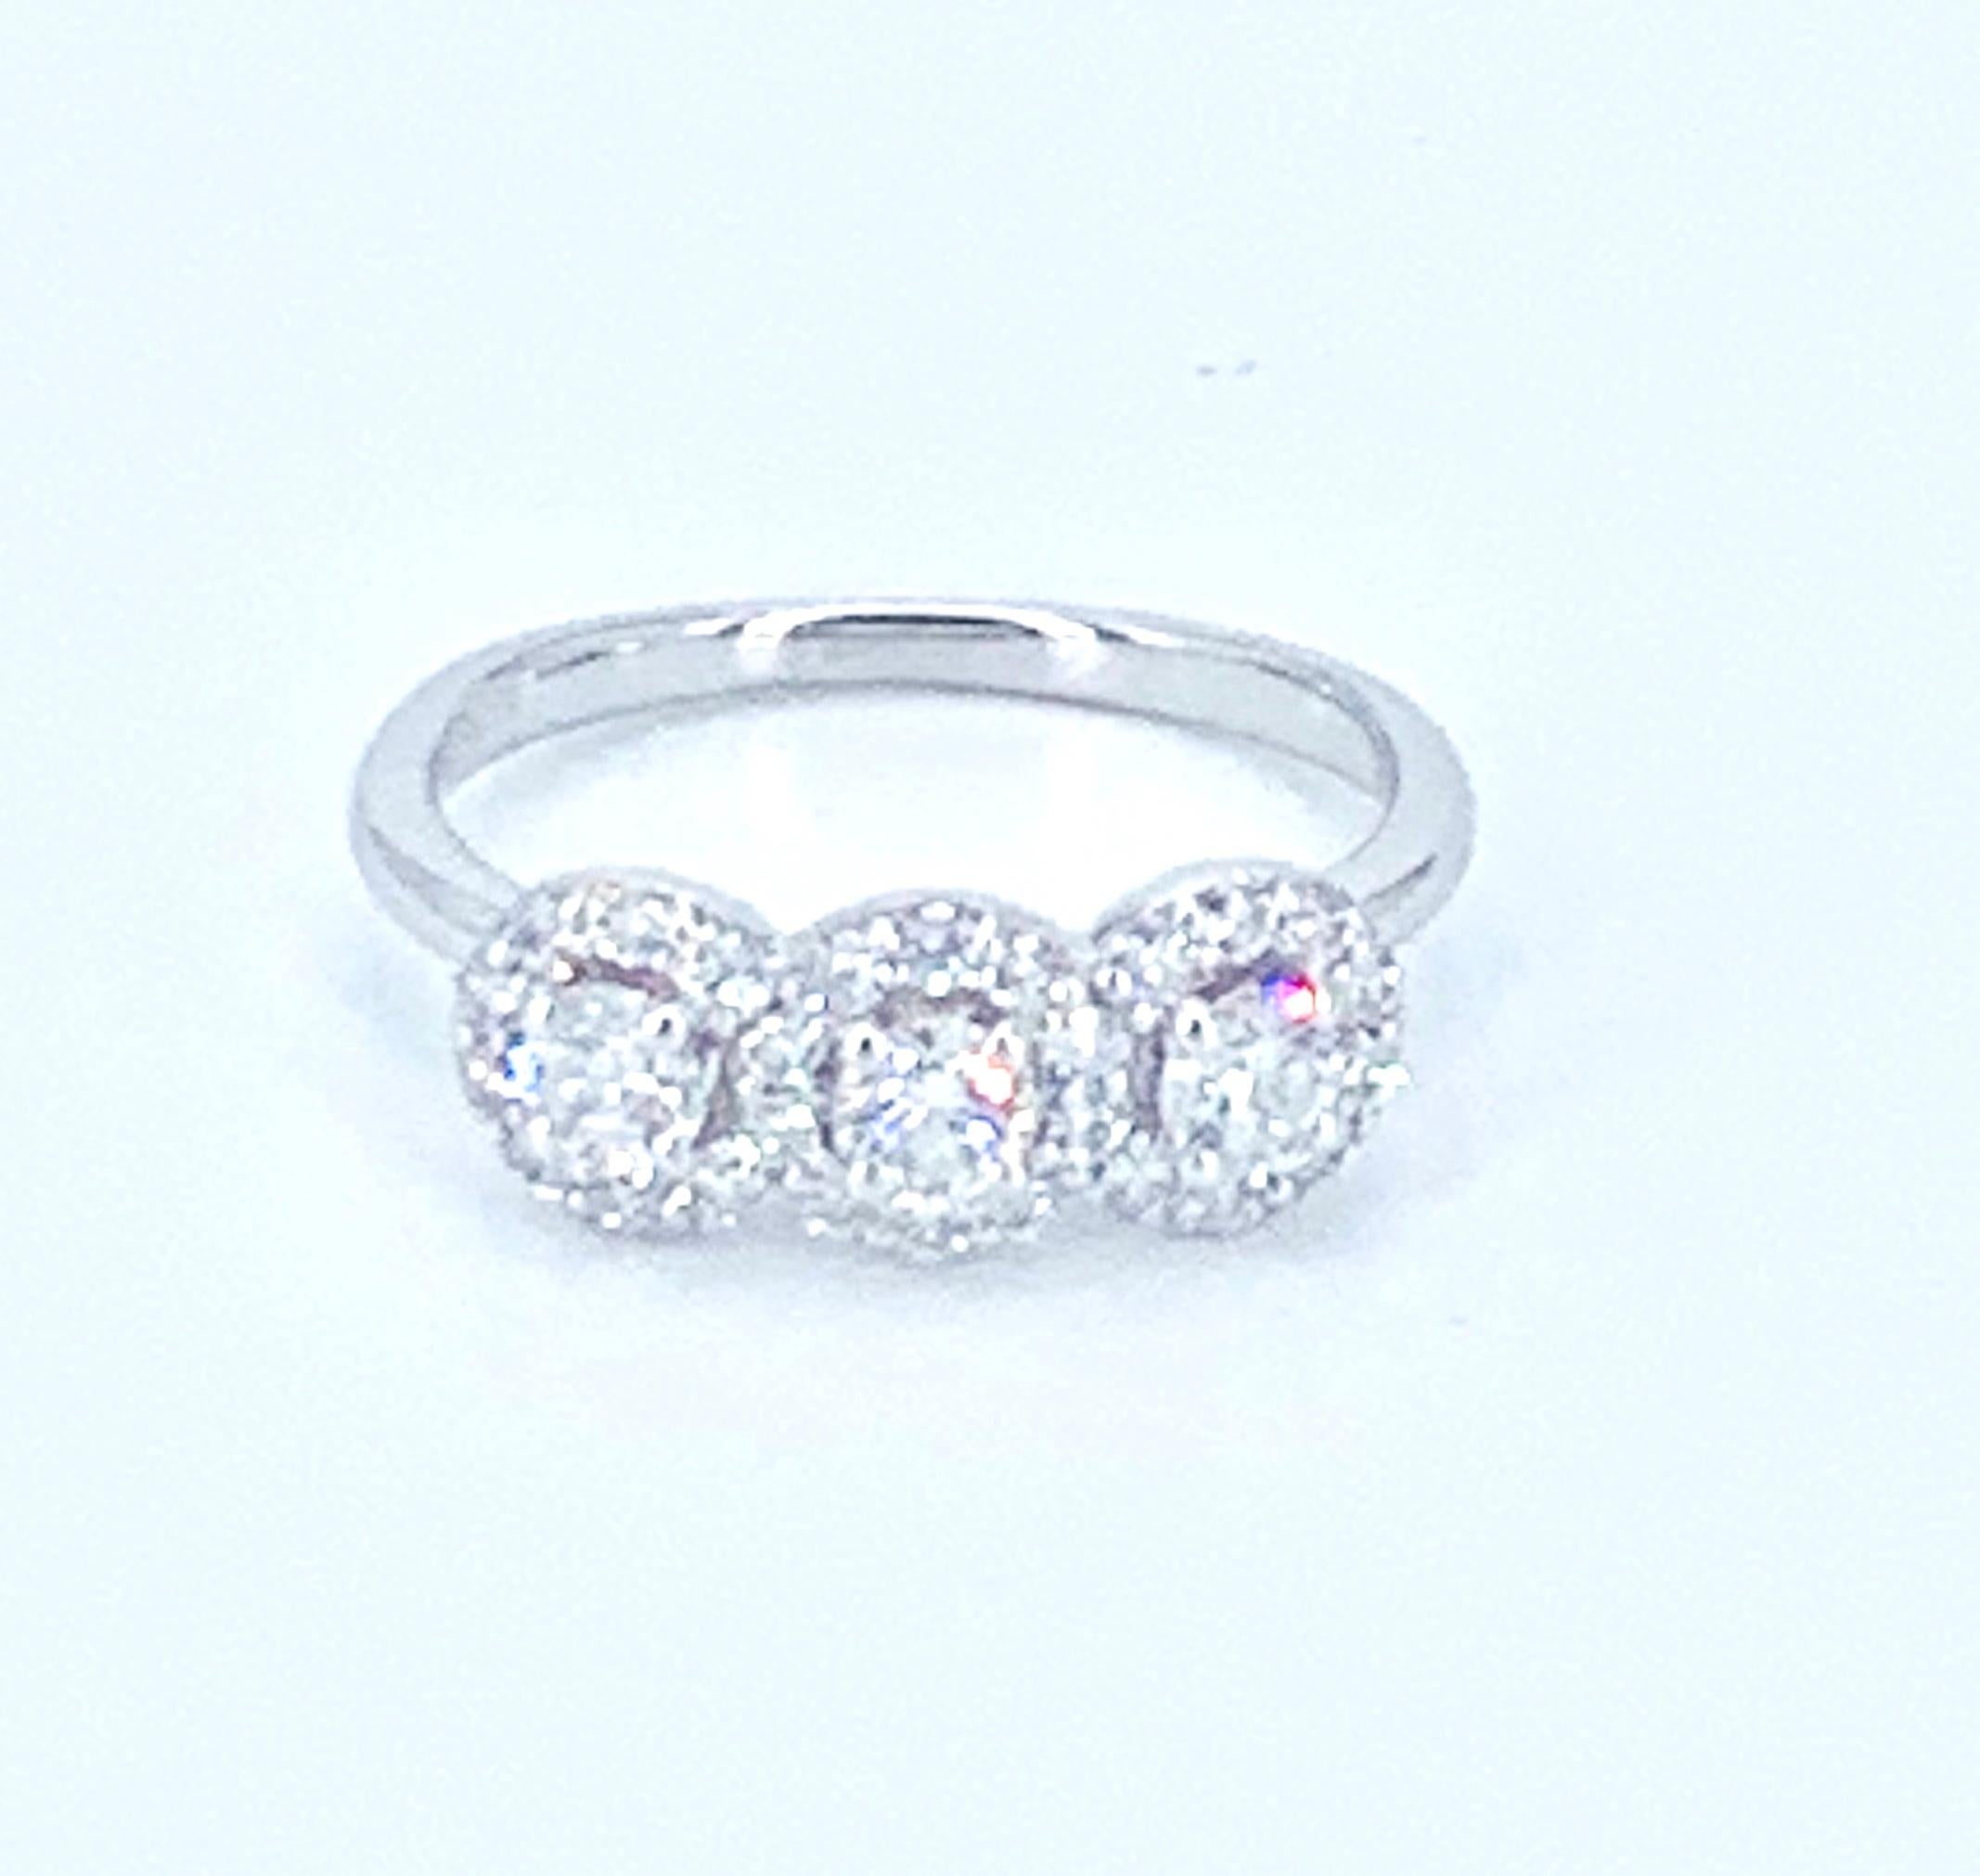 This beautifully bright contemporary 0.93 carat diamond Trilogy ring, illuminates the finger with the halo style design to each of the 3 large diamonds. 

Set in 18Kt White Gold, it is a timelessly precious and gorgeous ring one can wear on a daily